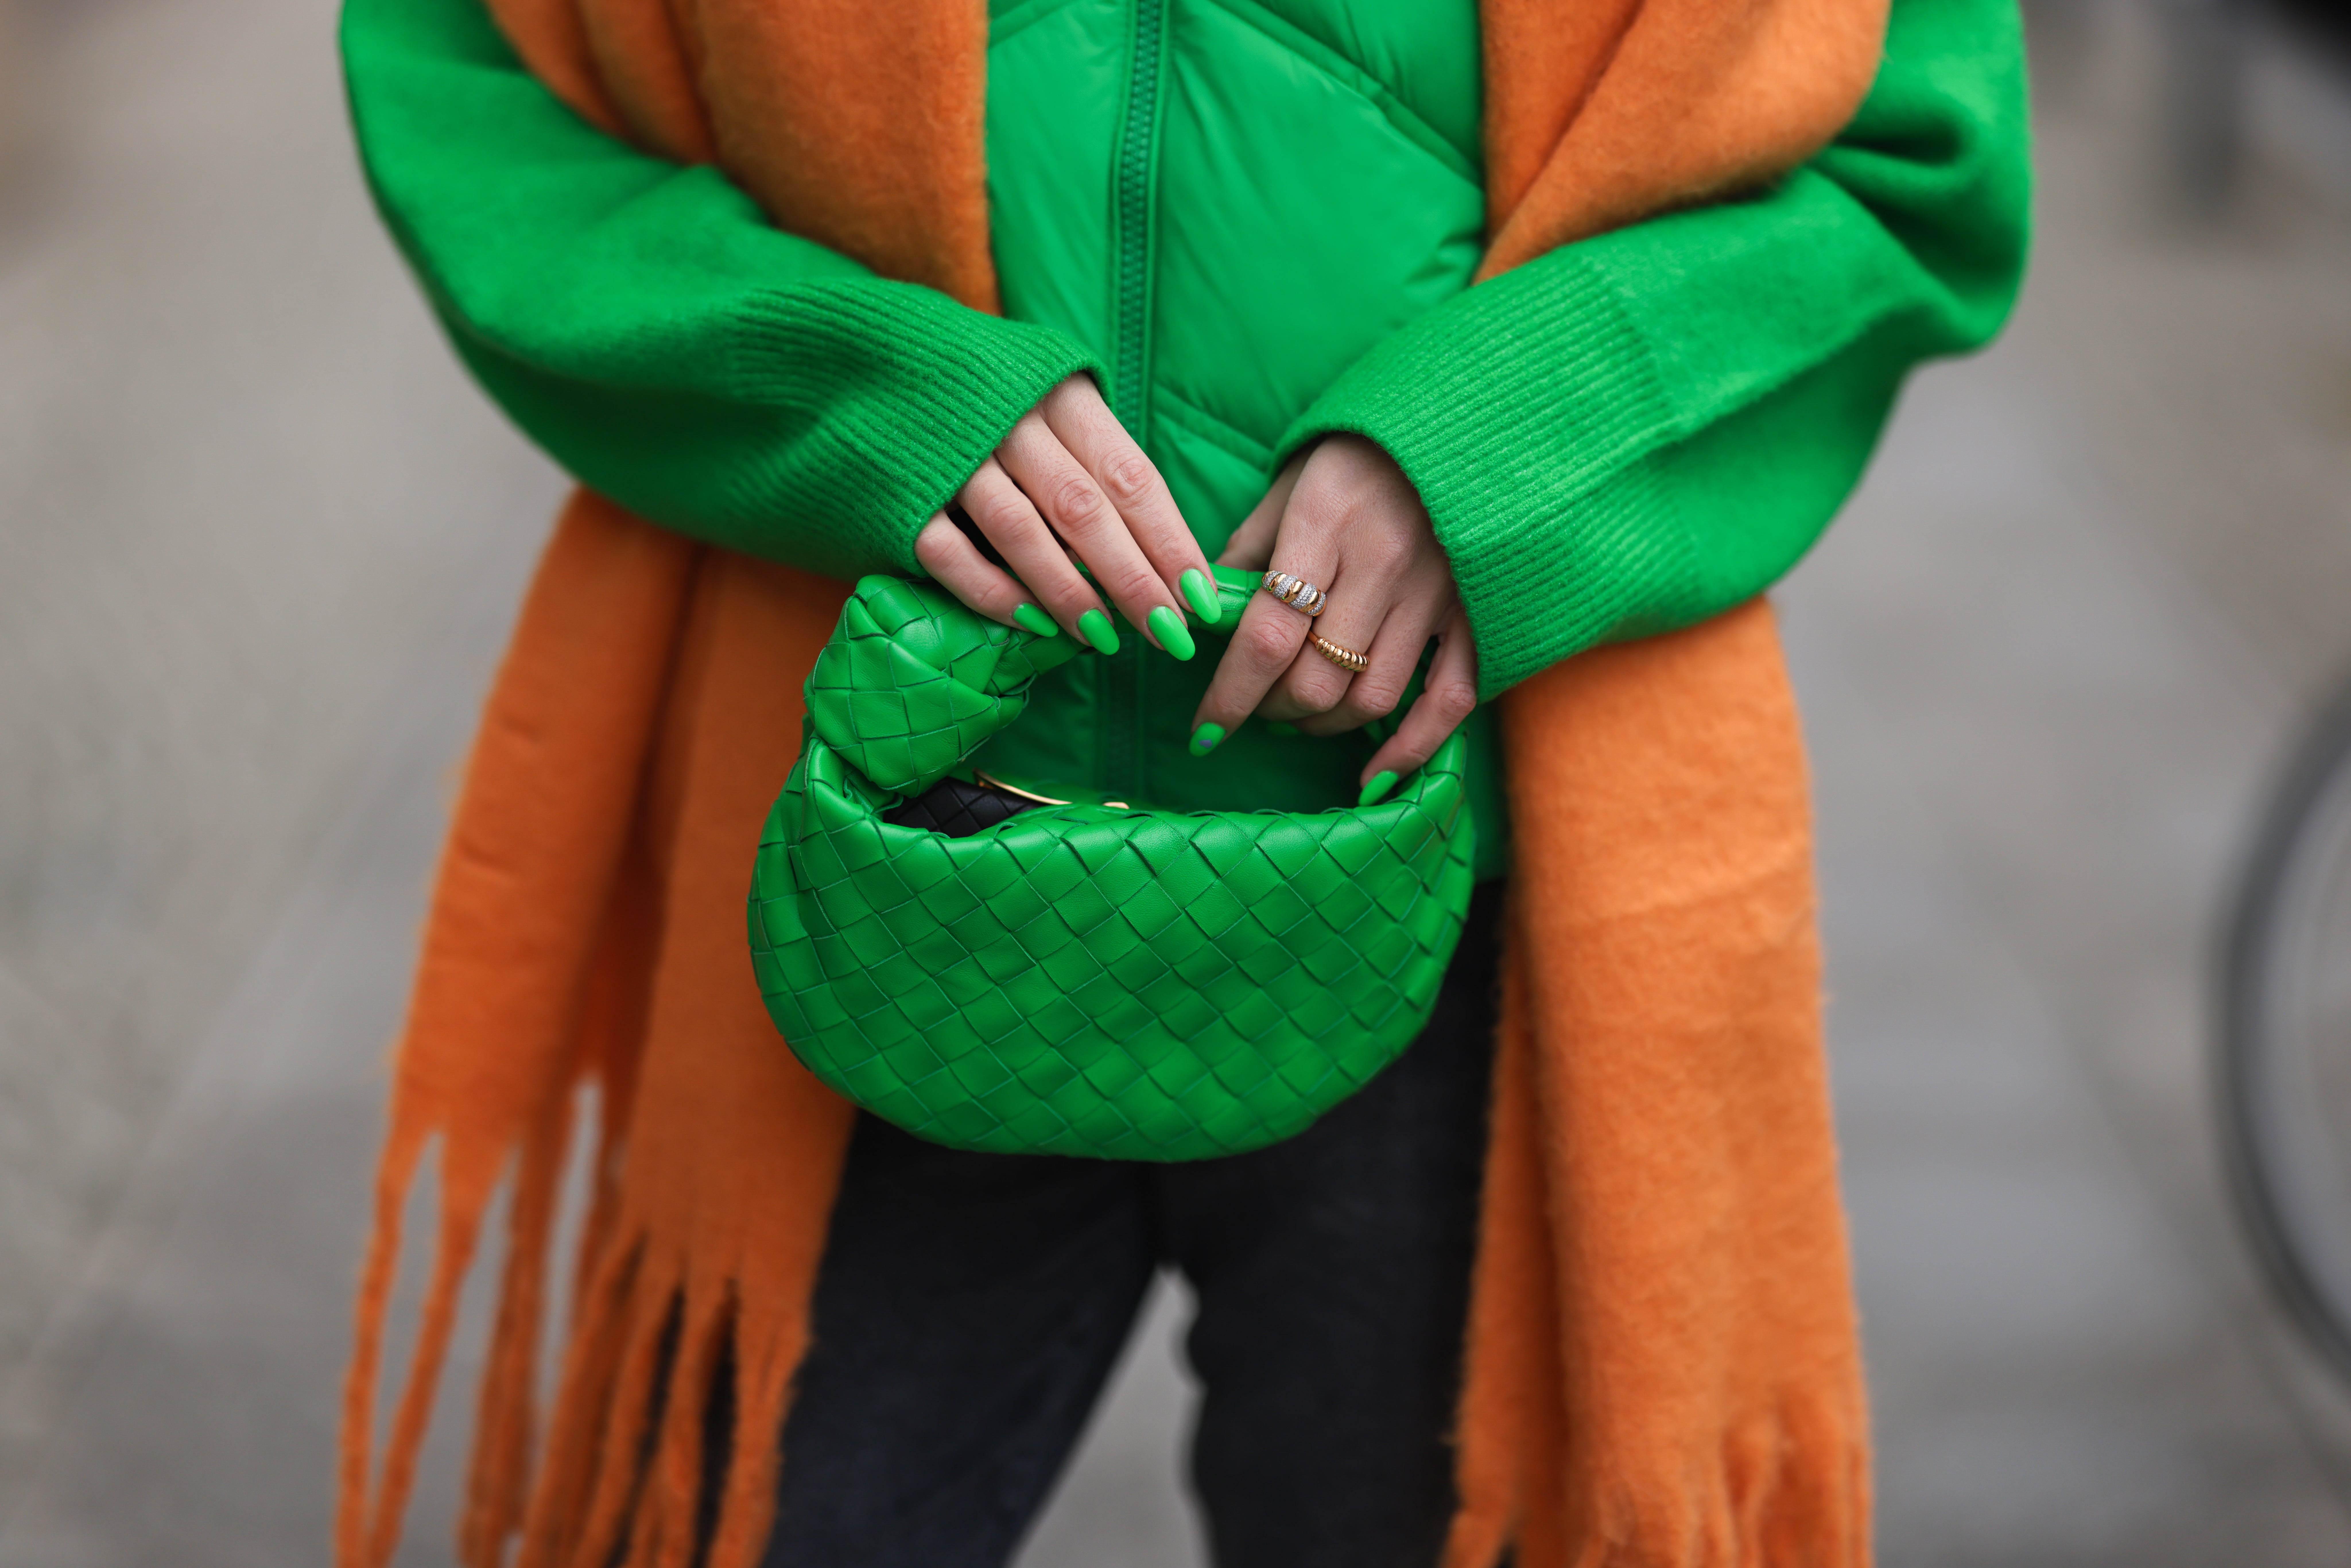 7 Ways To Wear Green On St. Patrick's Day